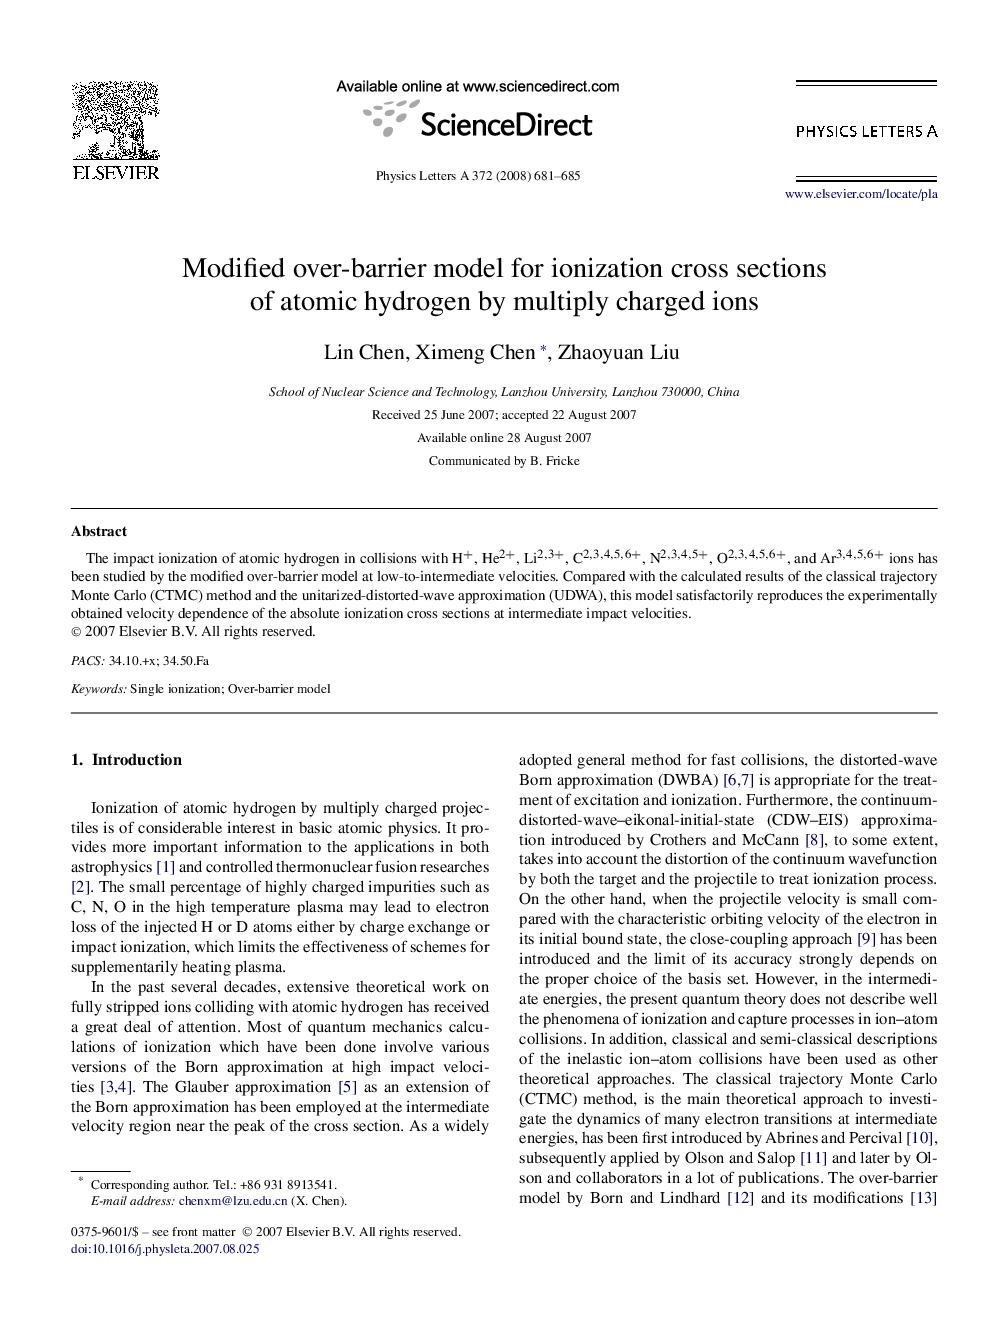 Modified over-barrier model for ionization cross sections of atomic hydrogen by multiply charged ions